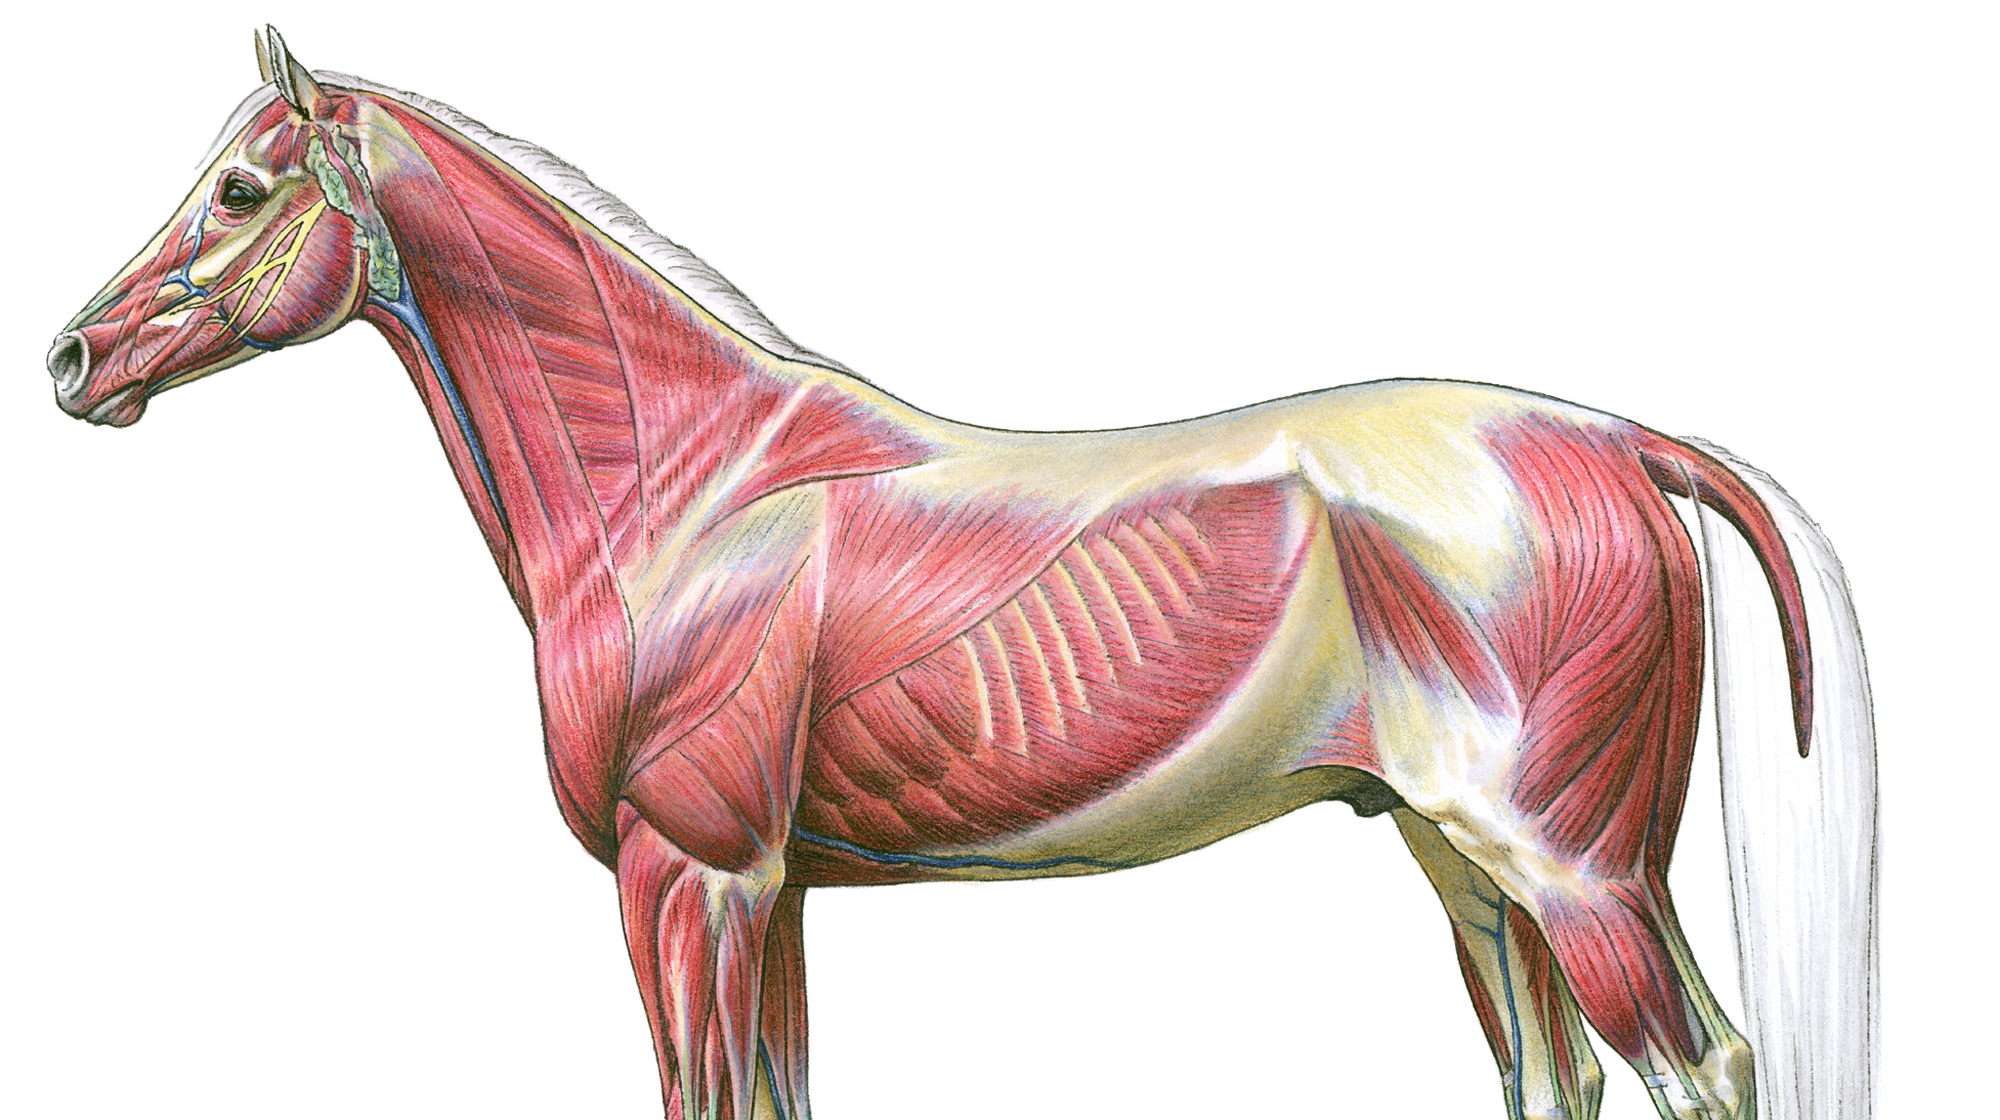 Equine Muscles & Tendons